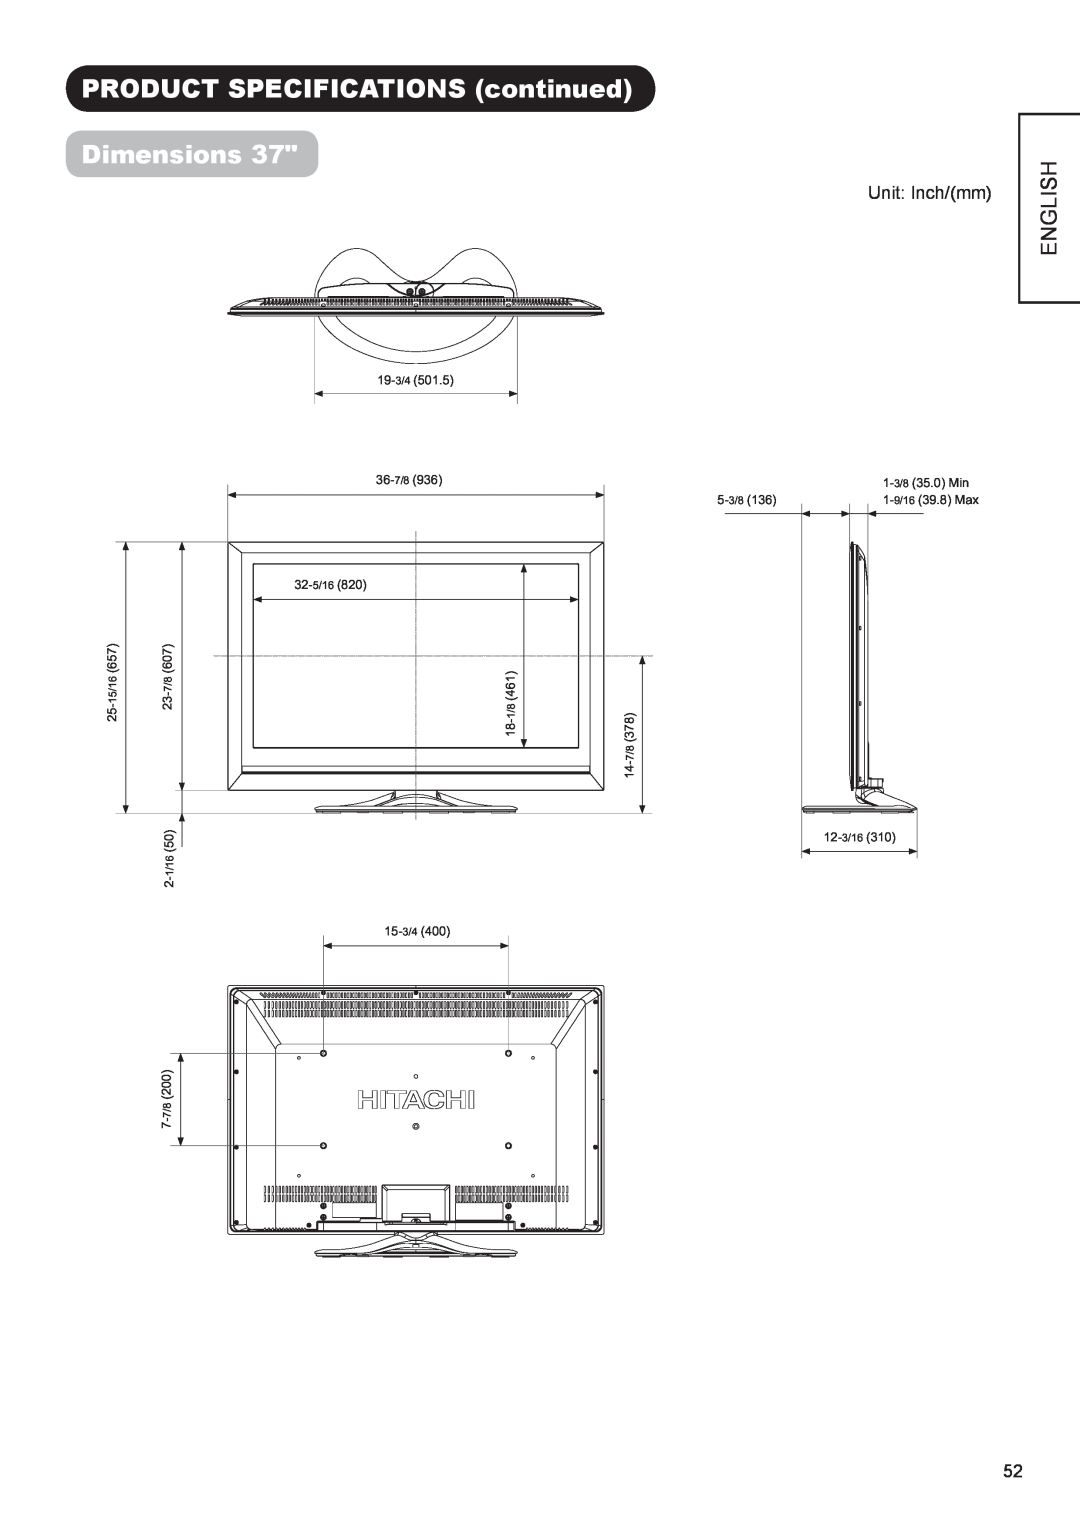 Hitachi UT42X902, UT47X902, UT37X902 manual PRODUCT SPECIFICATIONS continued Dimensions, English, Unit Inch/mm 